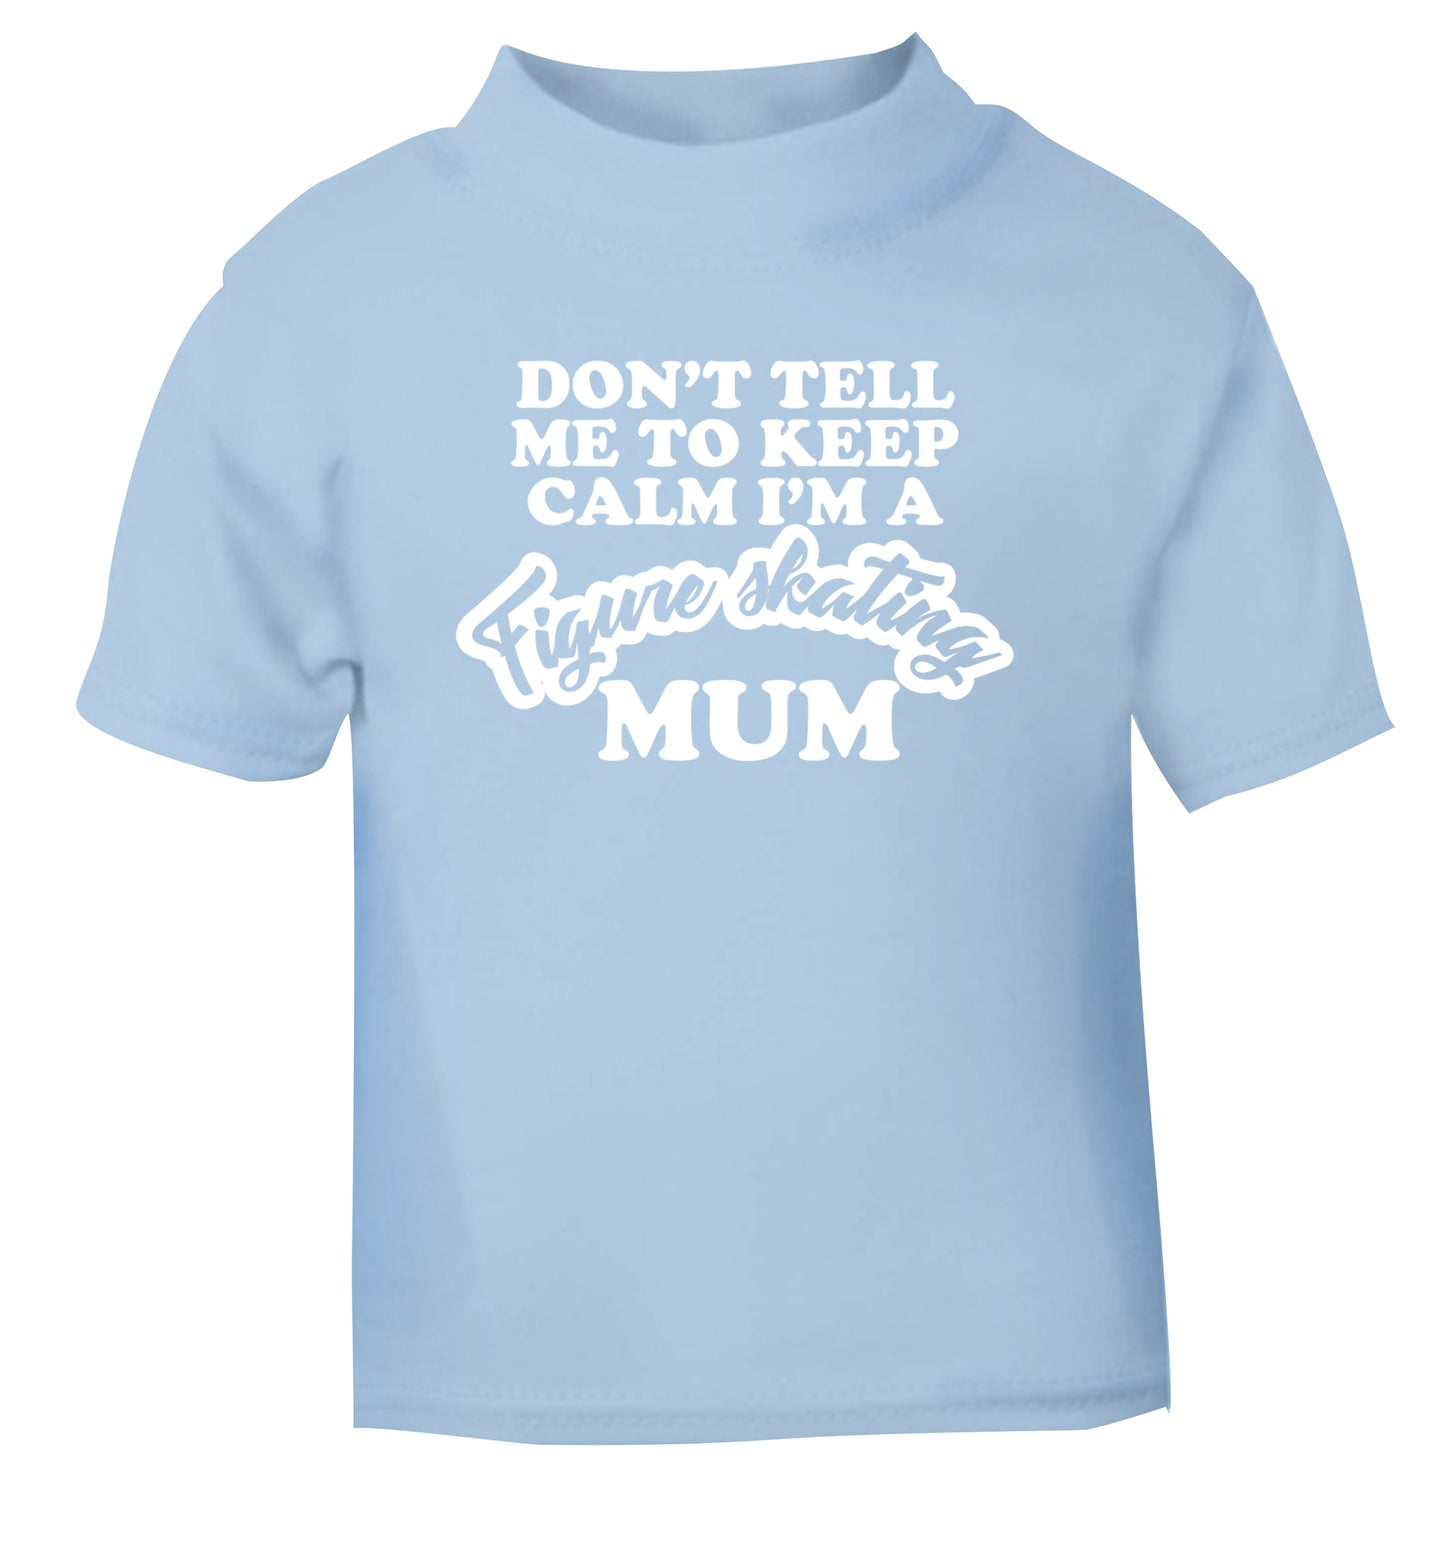 Don't tell me to keep calm I'm a figure skating mum light blue Baby Toddler Tshirt 2 Years